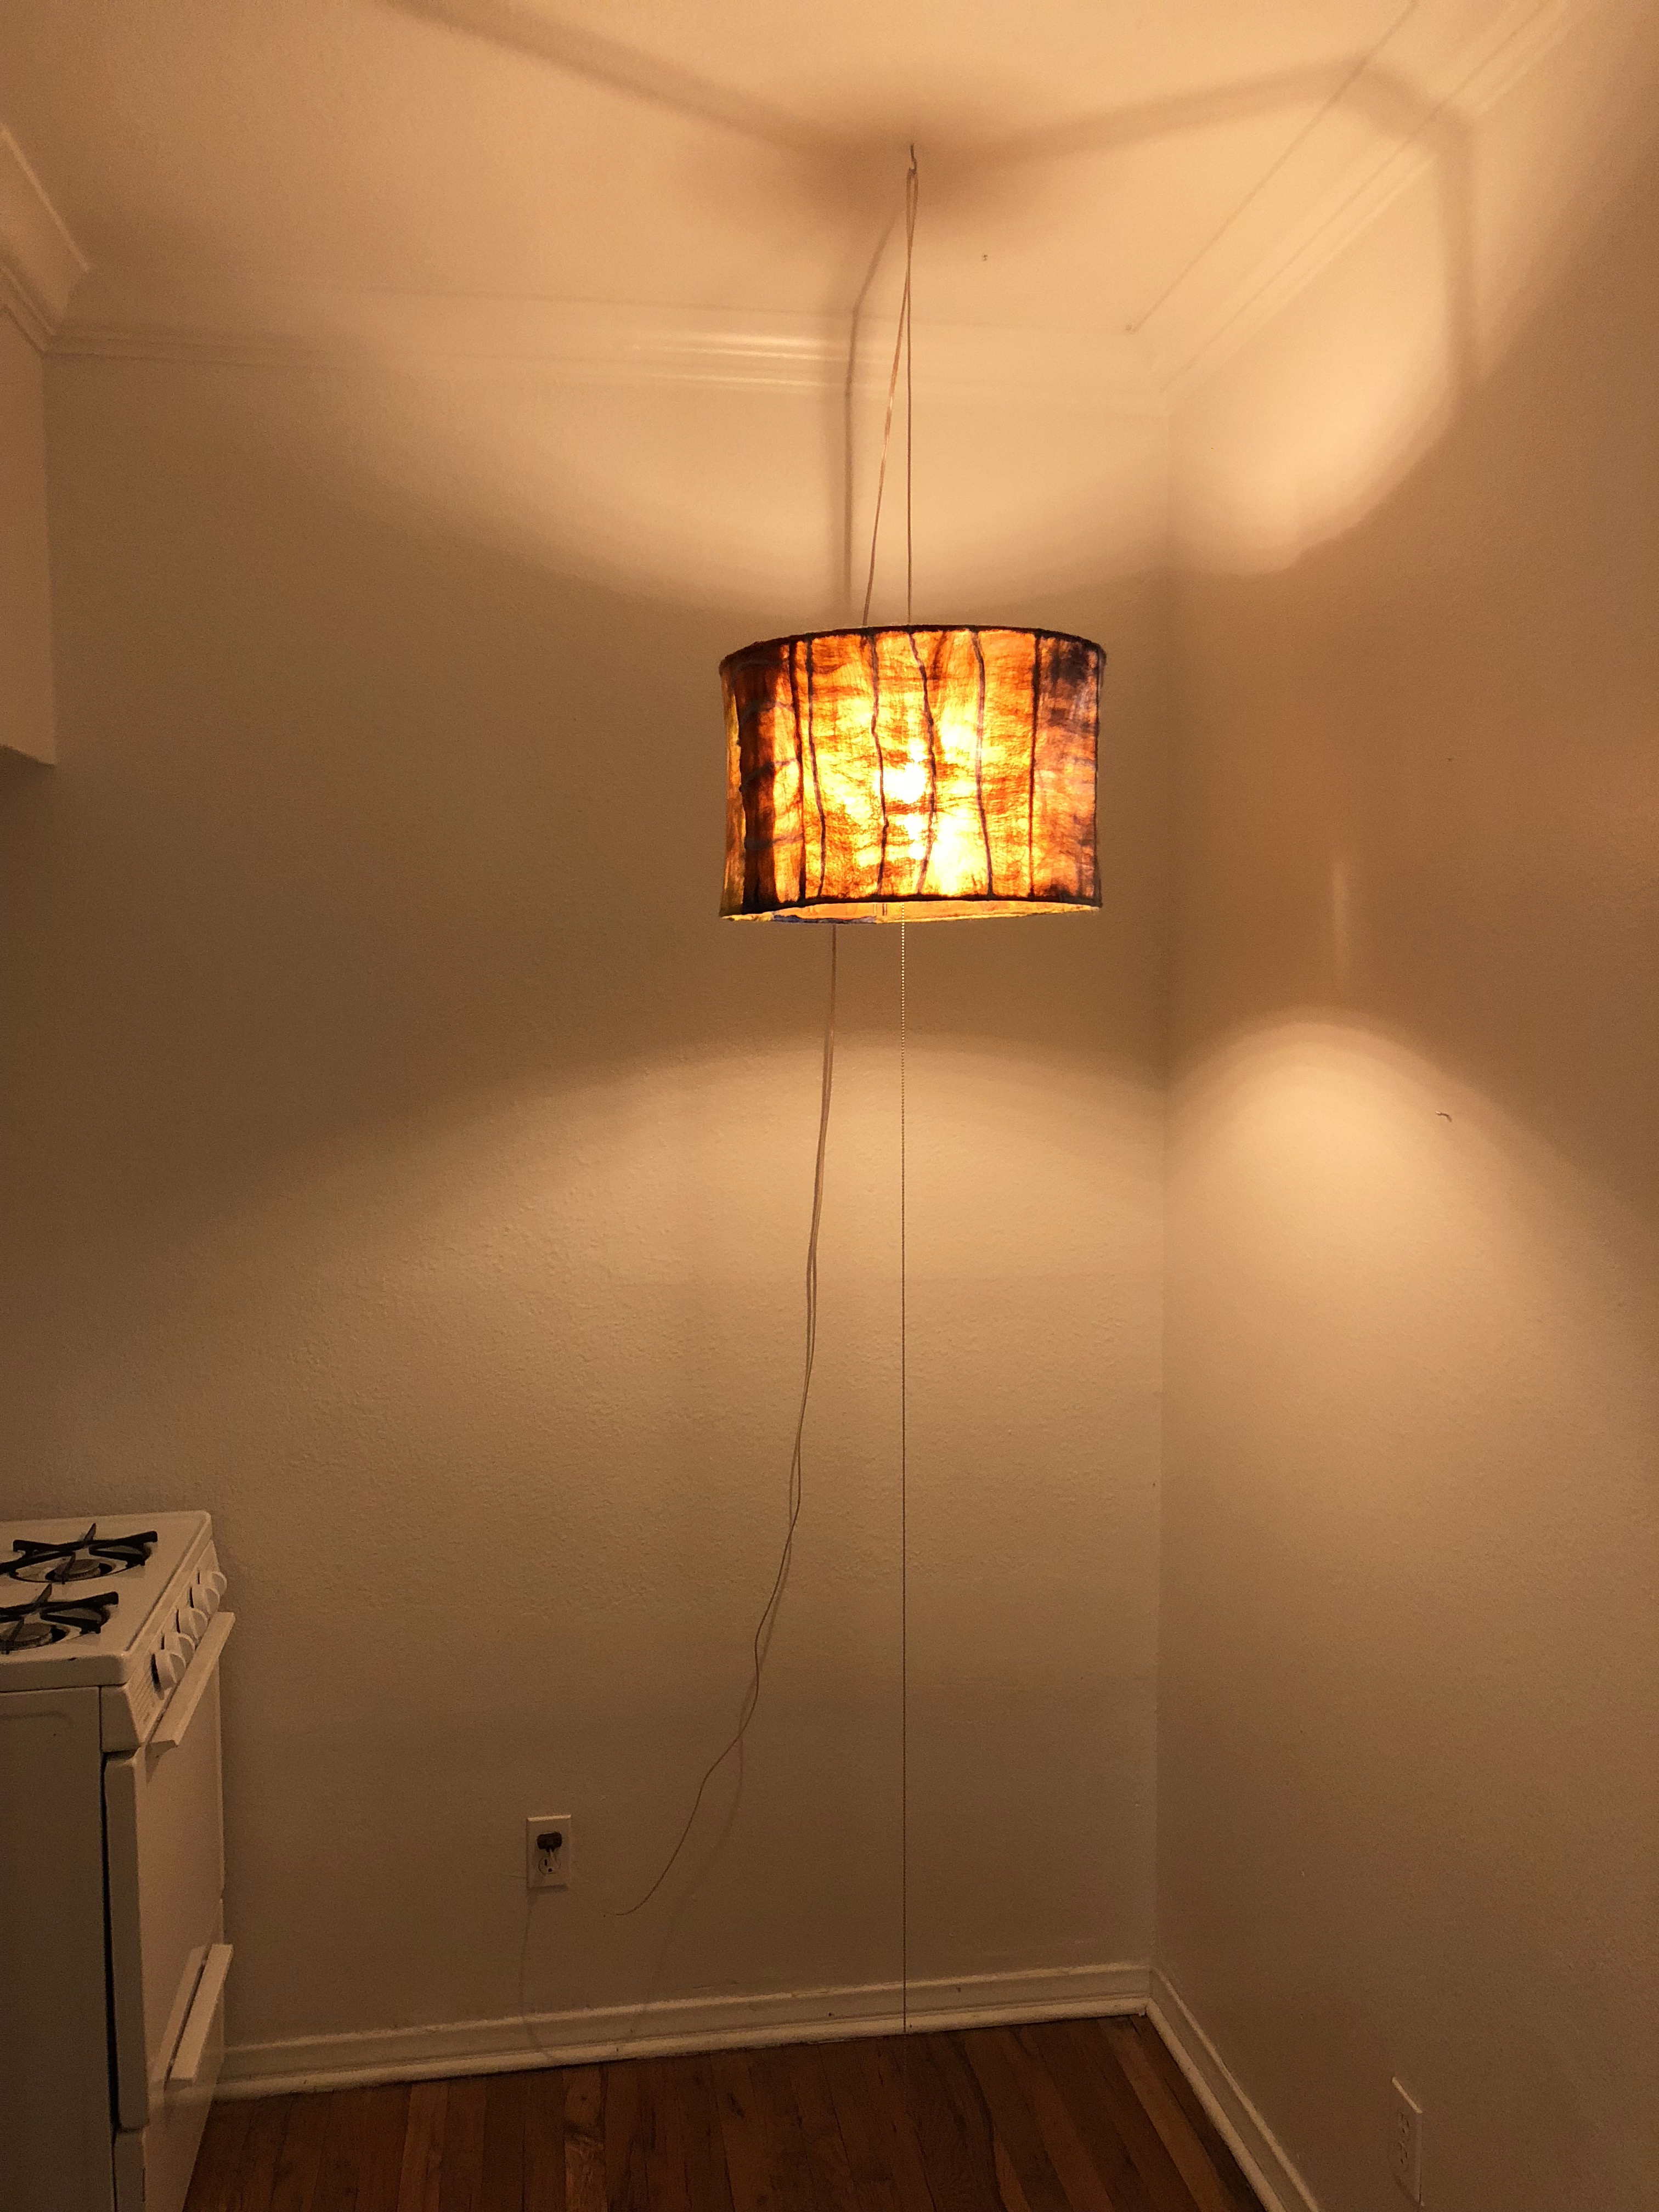 A felt lamp hanging from the ceiling of a kitchen emitting warm light